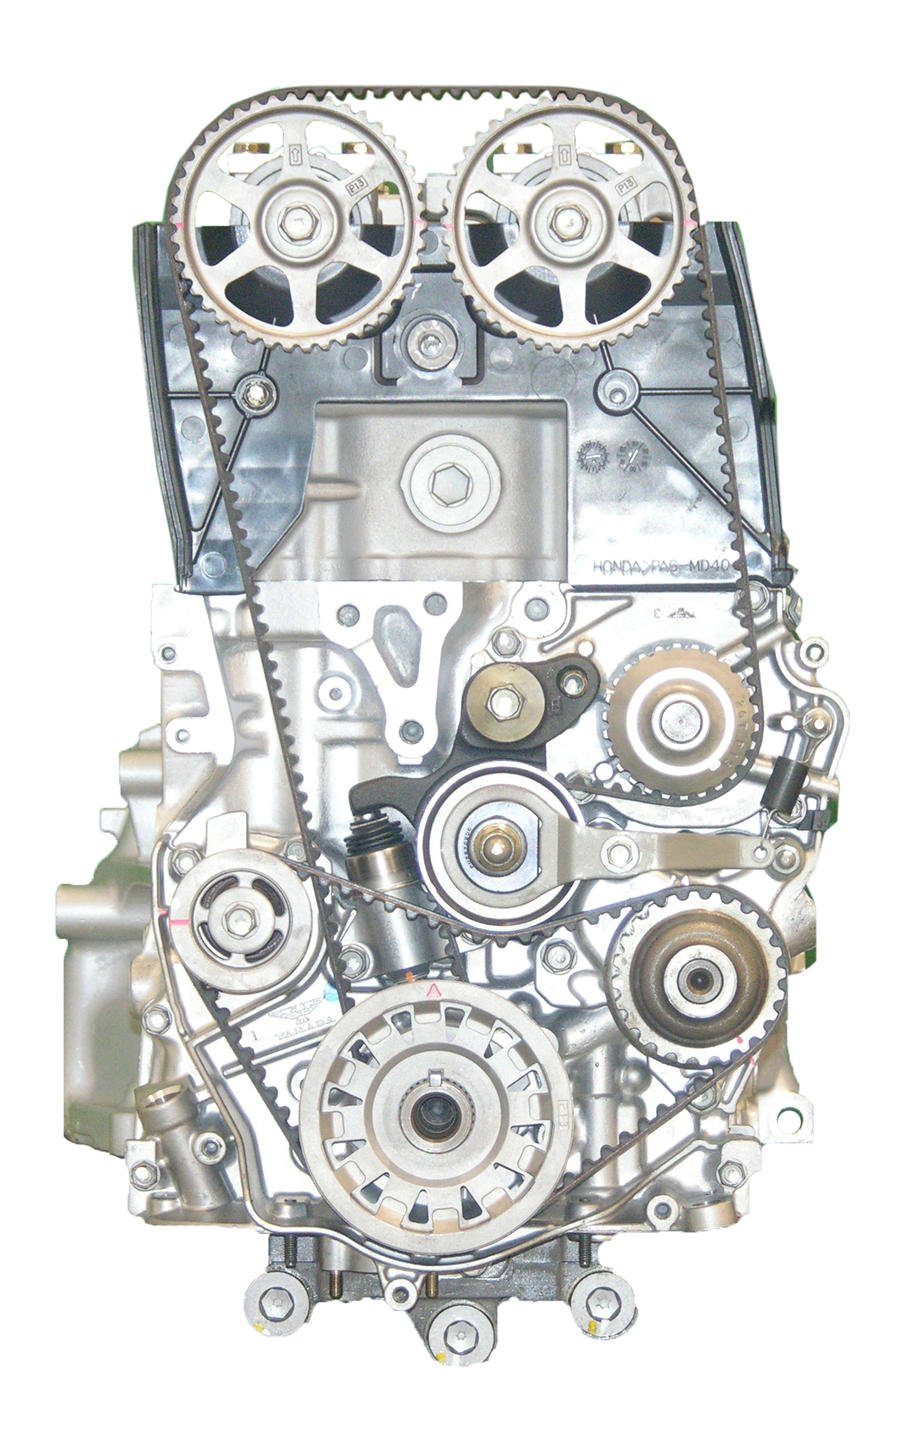 Remanufactured Crate Engine for 1997 Honda Prelude with